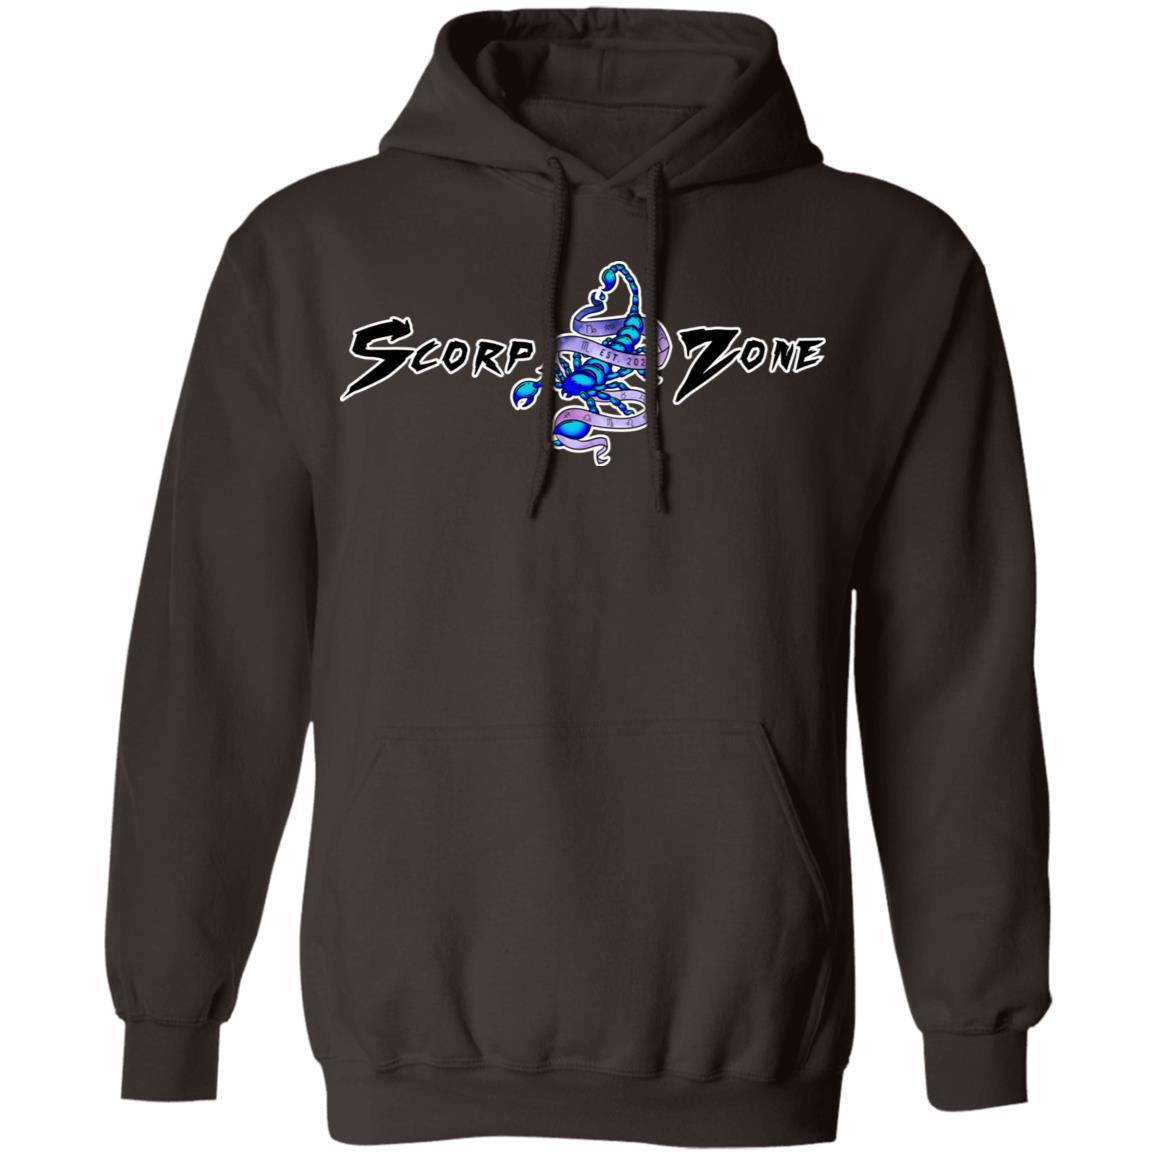 Pullover Hoodie - Karma Is Only A Bitch If You Are - Design On Back - White Letters - Large Scorp Zone Logo On Front